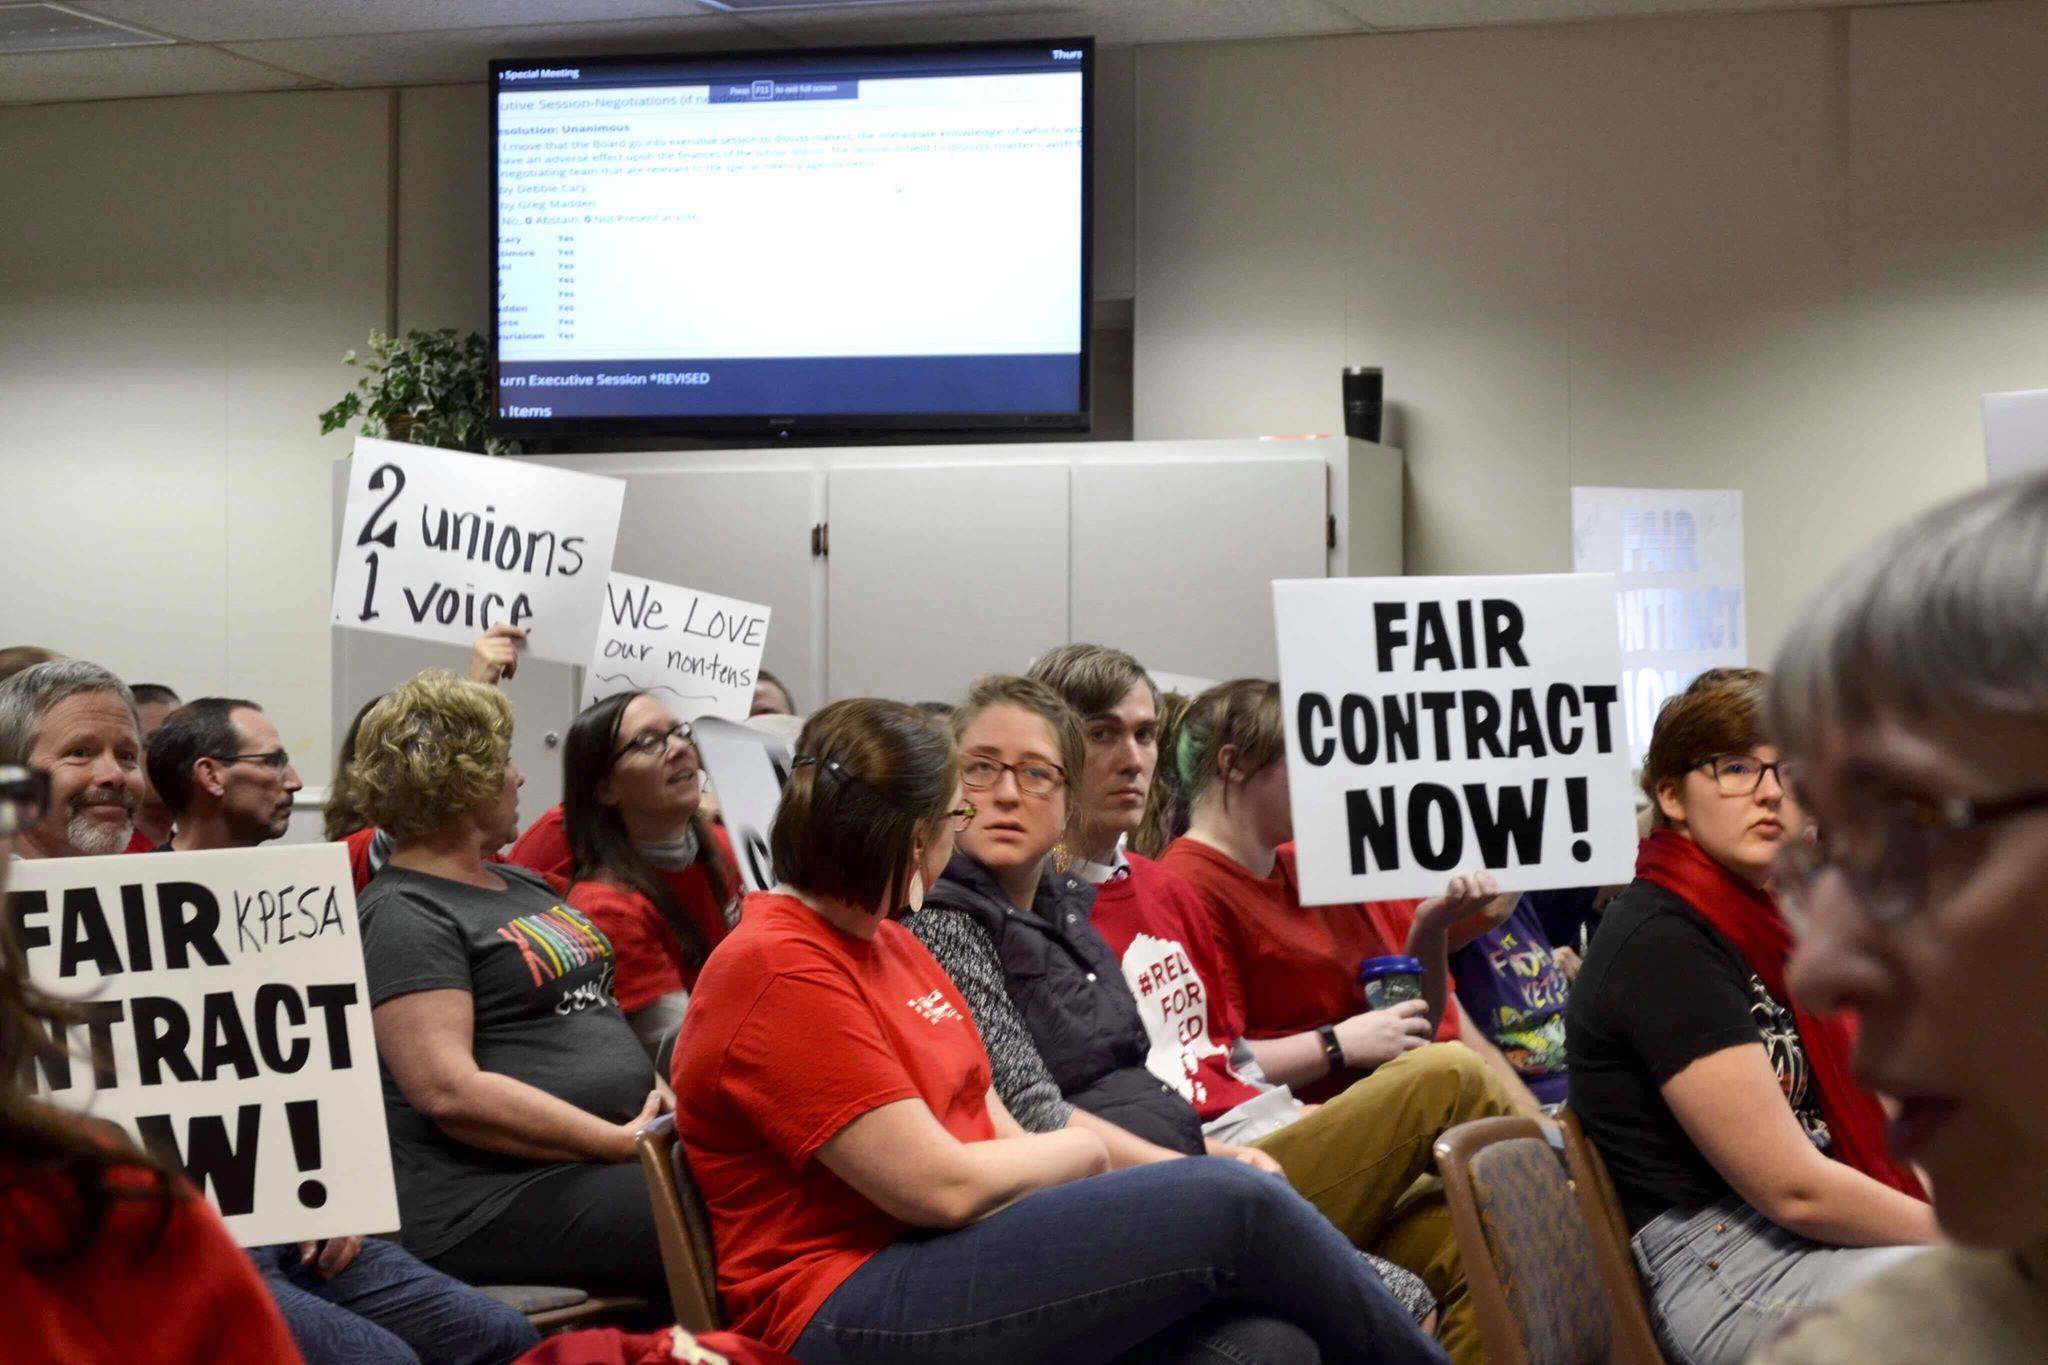 Kenai Peninsula Borough School District employees hold signs for a fair contract at a special board of education meeting, May 16, 2019, in Soldotna, Alaska. (Photo by Victoria Petersen/Peninsula Clarion)